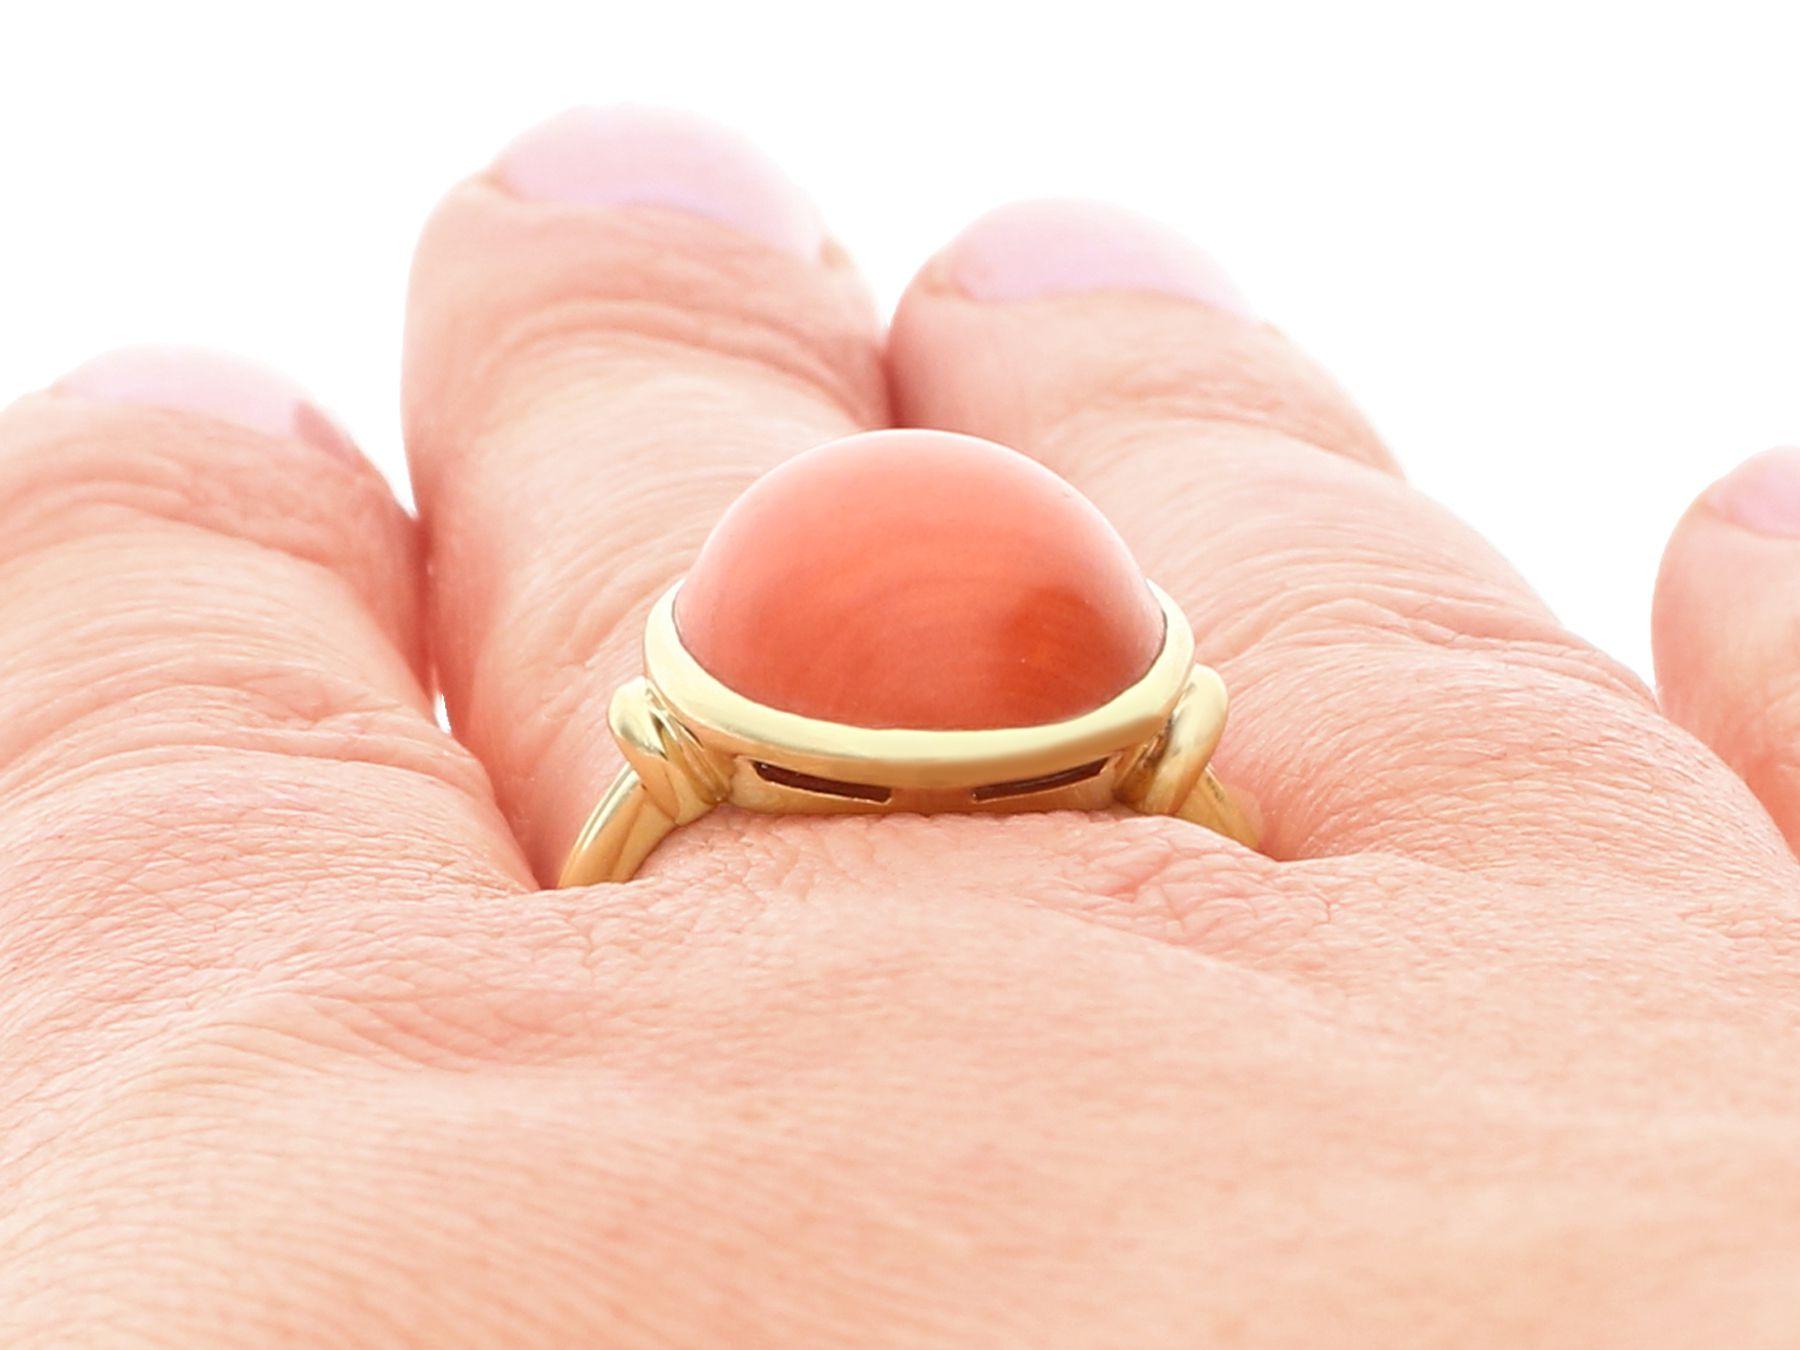 Vintage 13.20 Carat Cabochon Cut Coral and Yellow Gold Ring, Circa 1950 For Sale 4